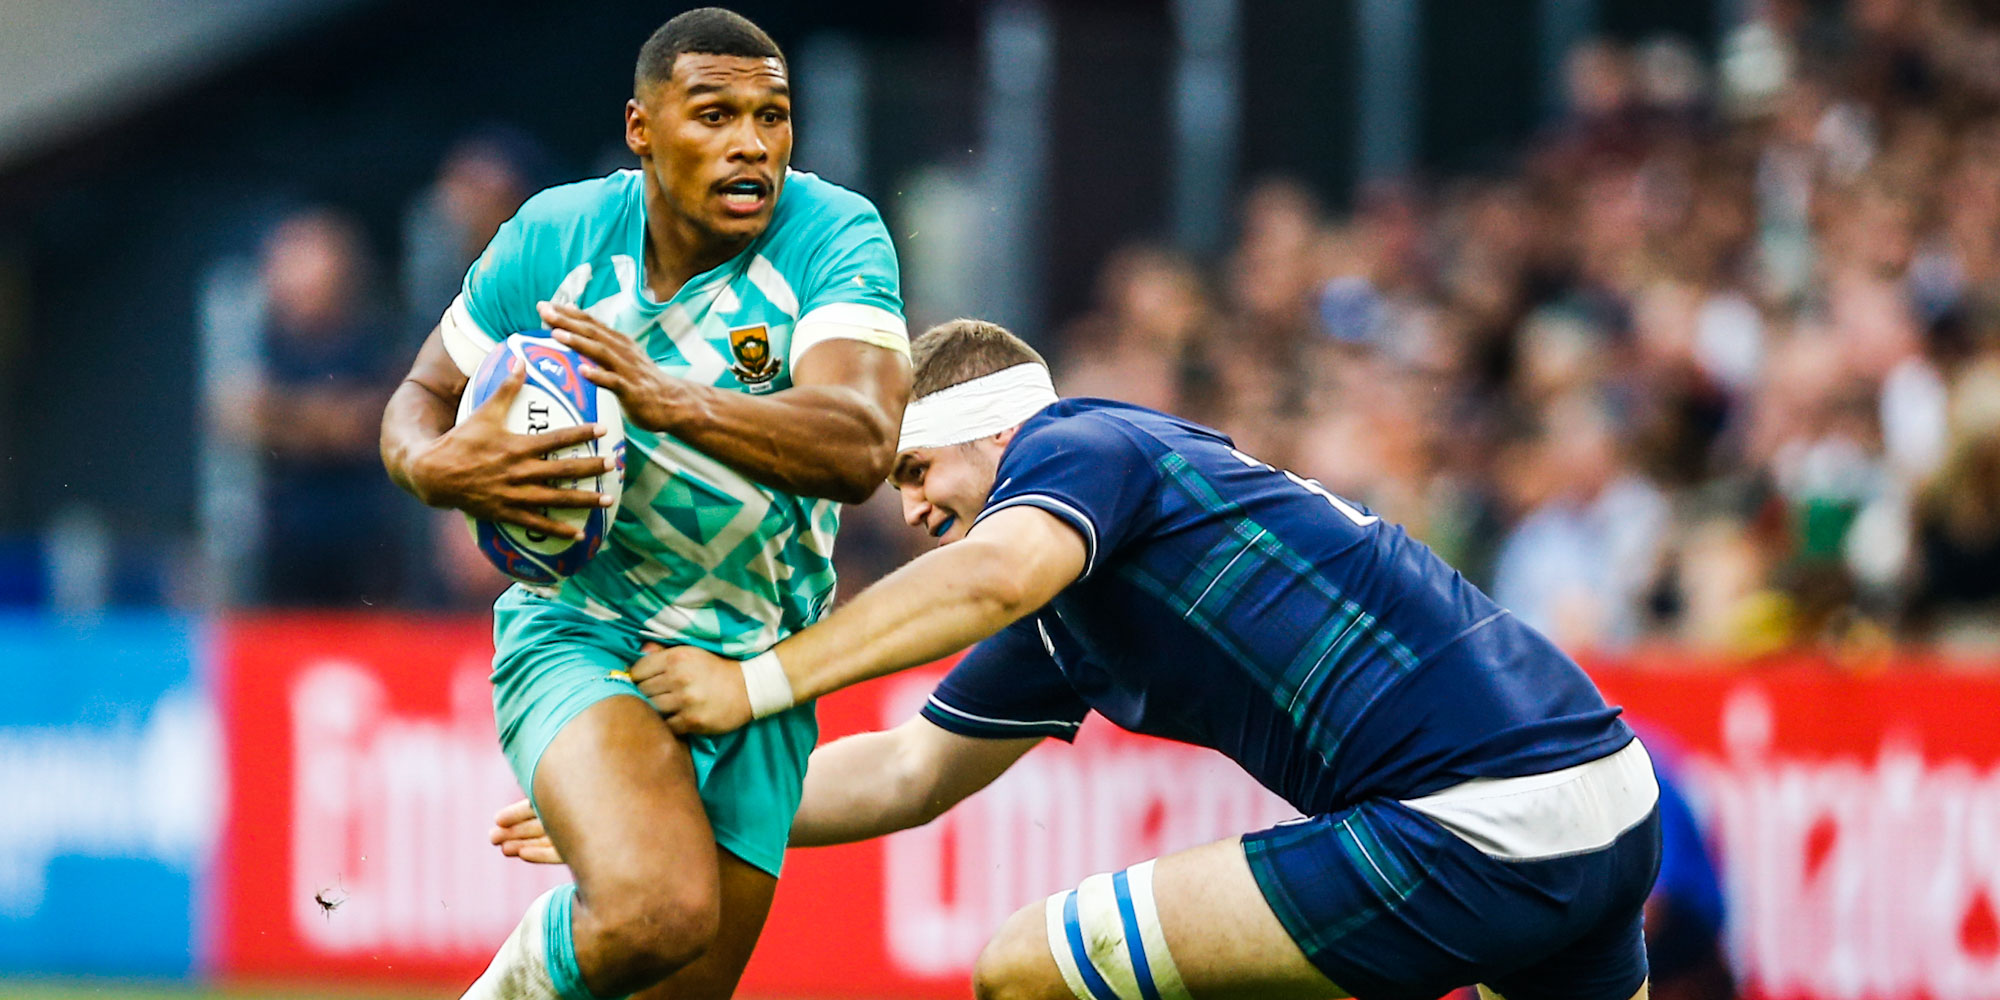 Damian Willemse is the only player to earn a second consecutive start for the Boks.